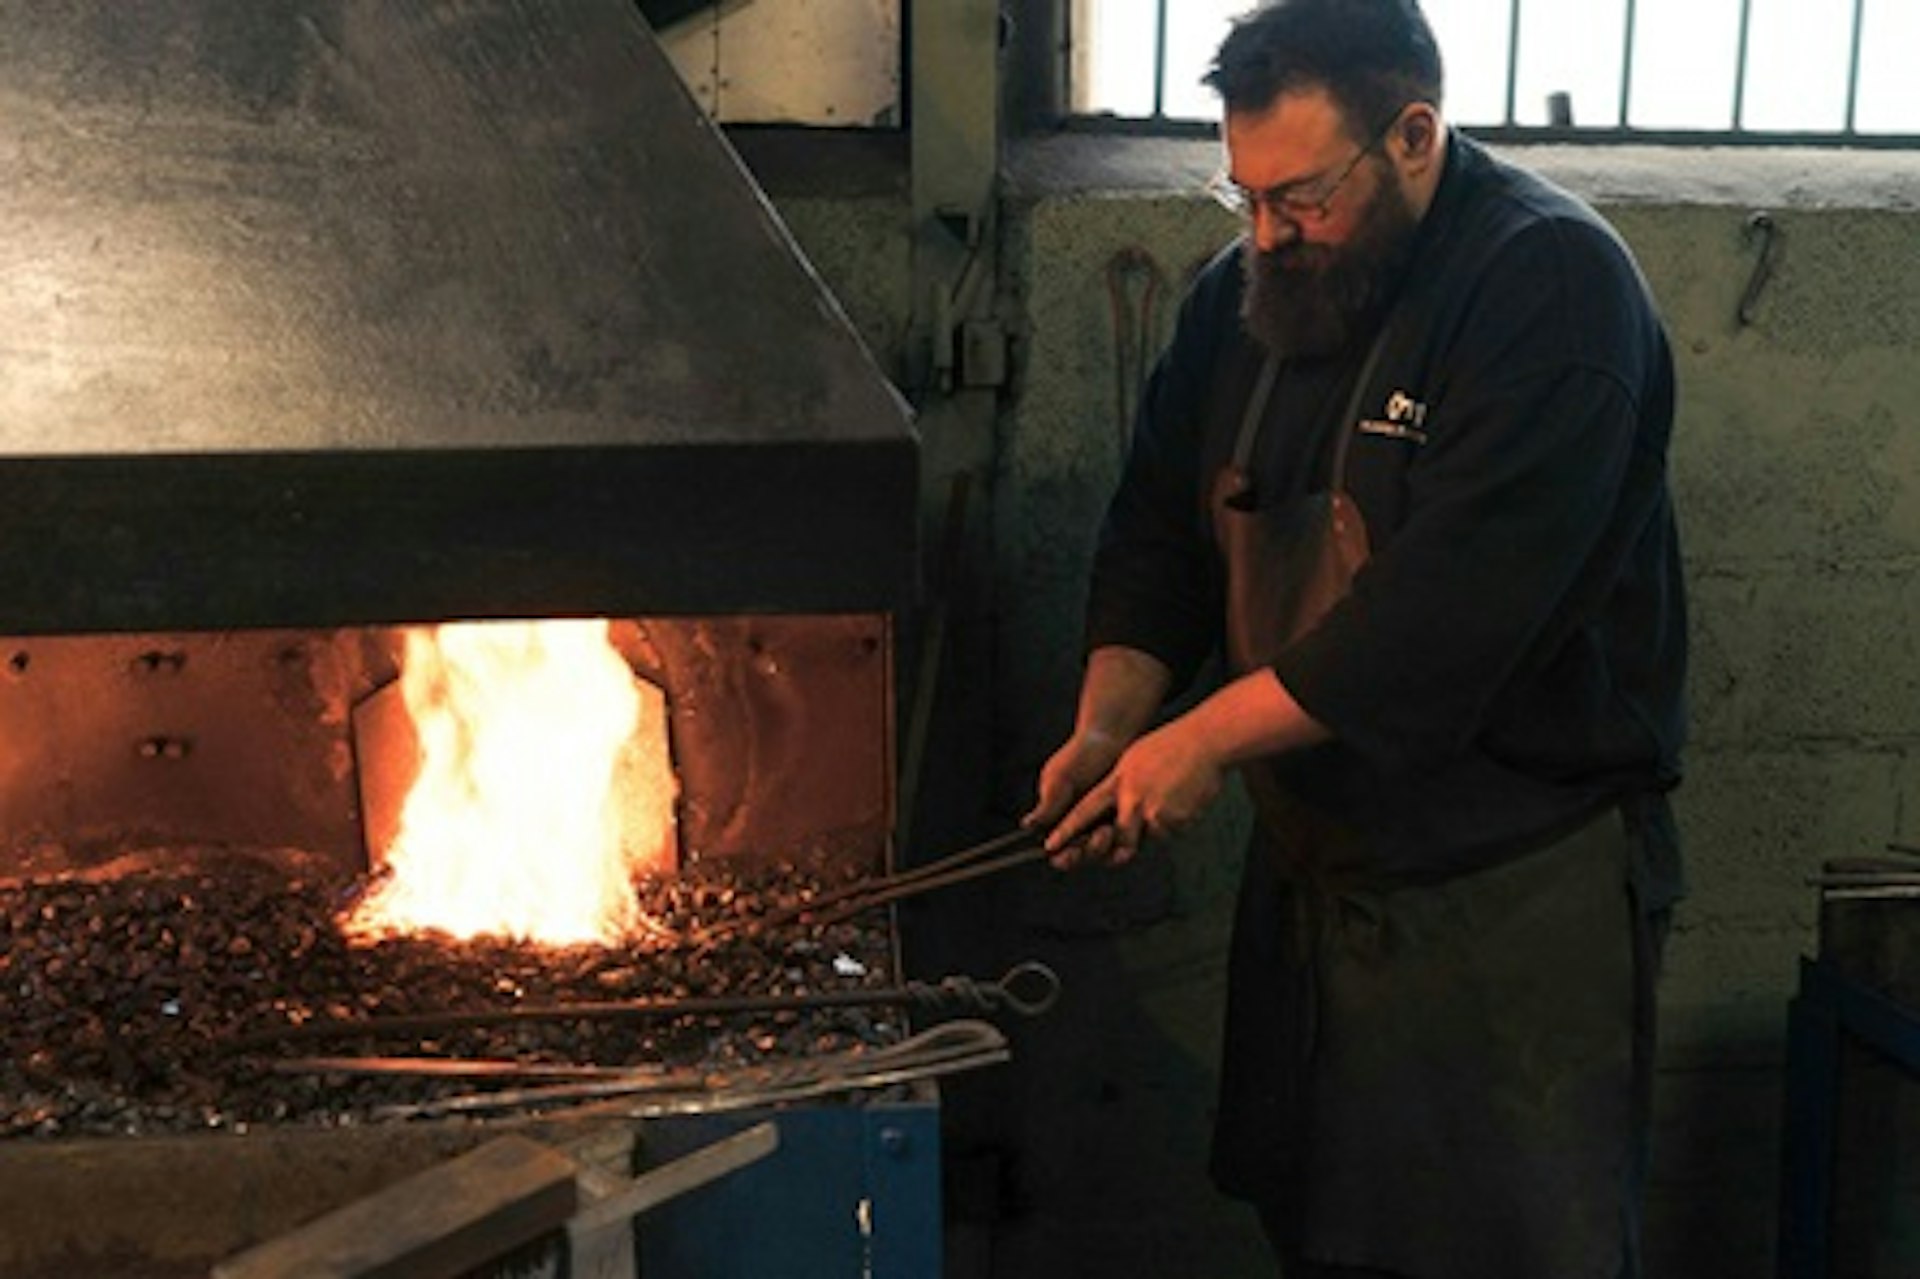 Blacksmith Forging Experience with Cider Tasting at The Oldfield Forge 3